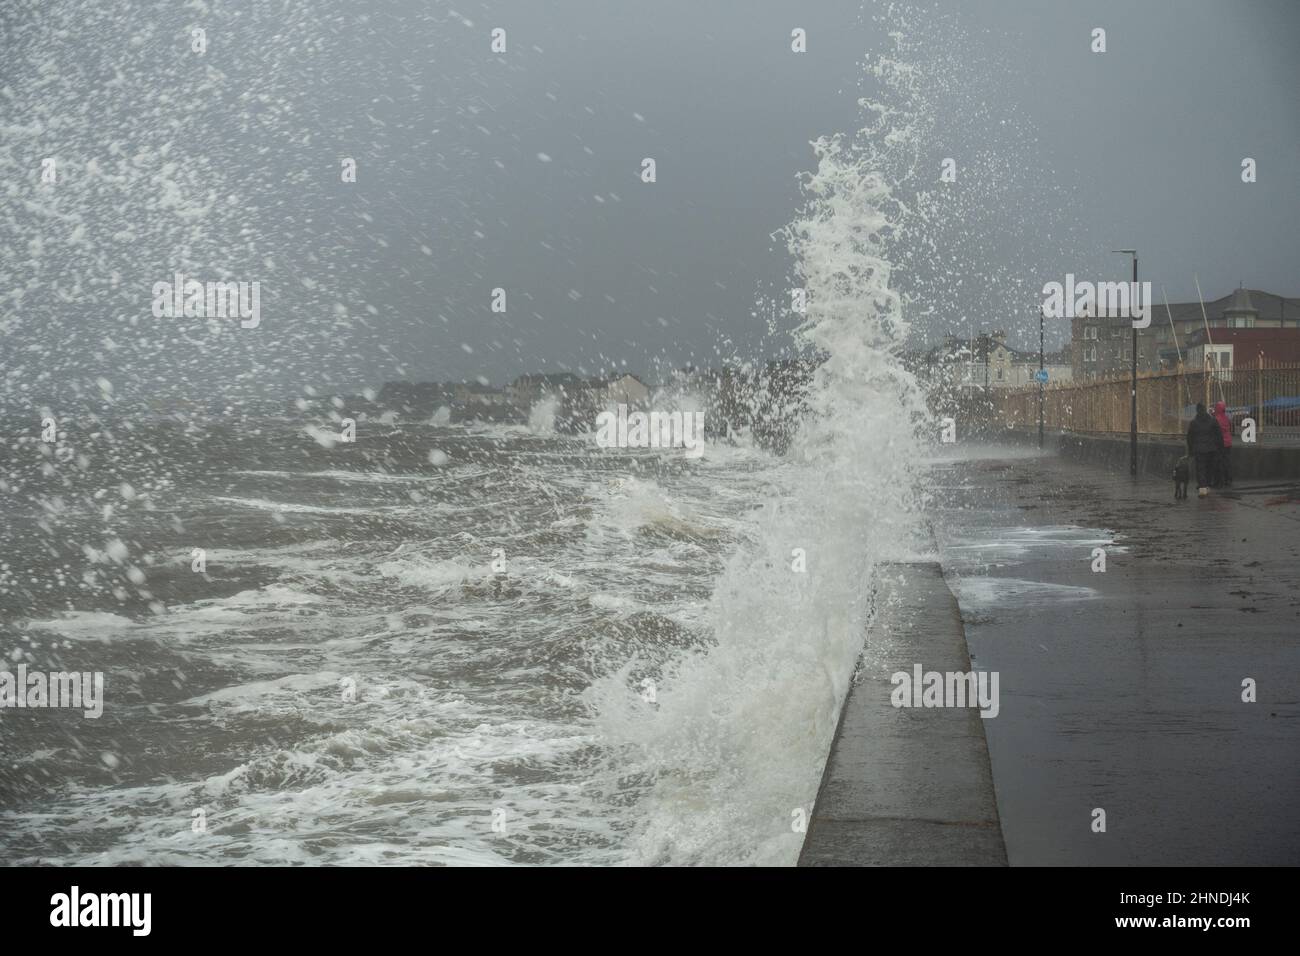 Prestwick, Scotland, UK; 16th February 2022. A High Tide ahead of Storm Dudley brings waves crashing up onto the Promenade at Prestwick Seafront, South Ayrshire.   Two women are walking their dogs along the promenade. Liz Leyden/Alamy Live News Stock Photo